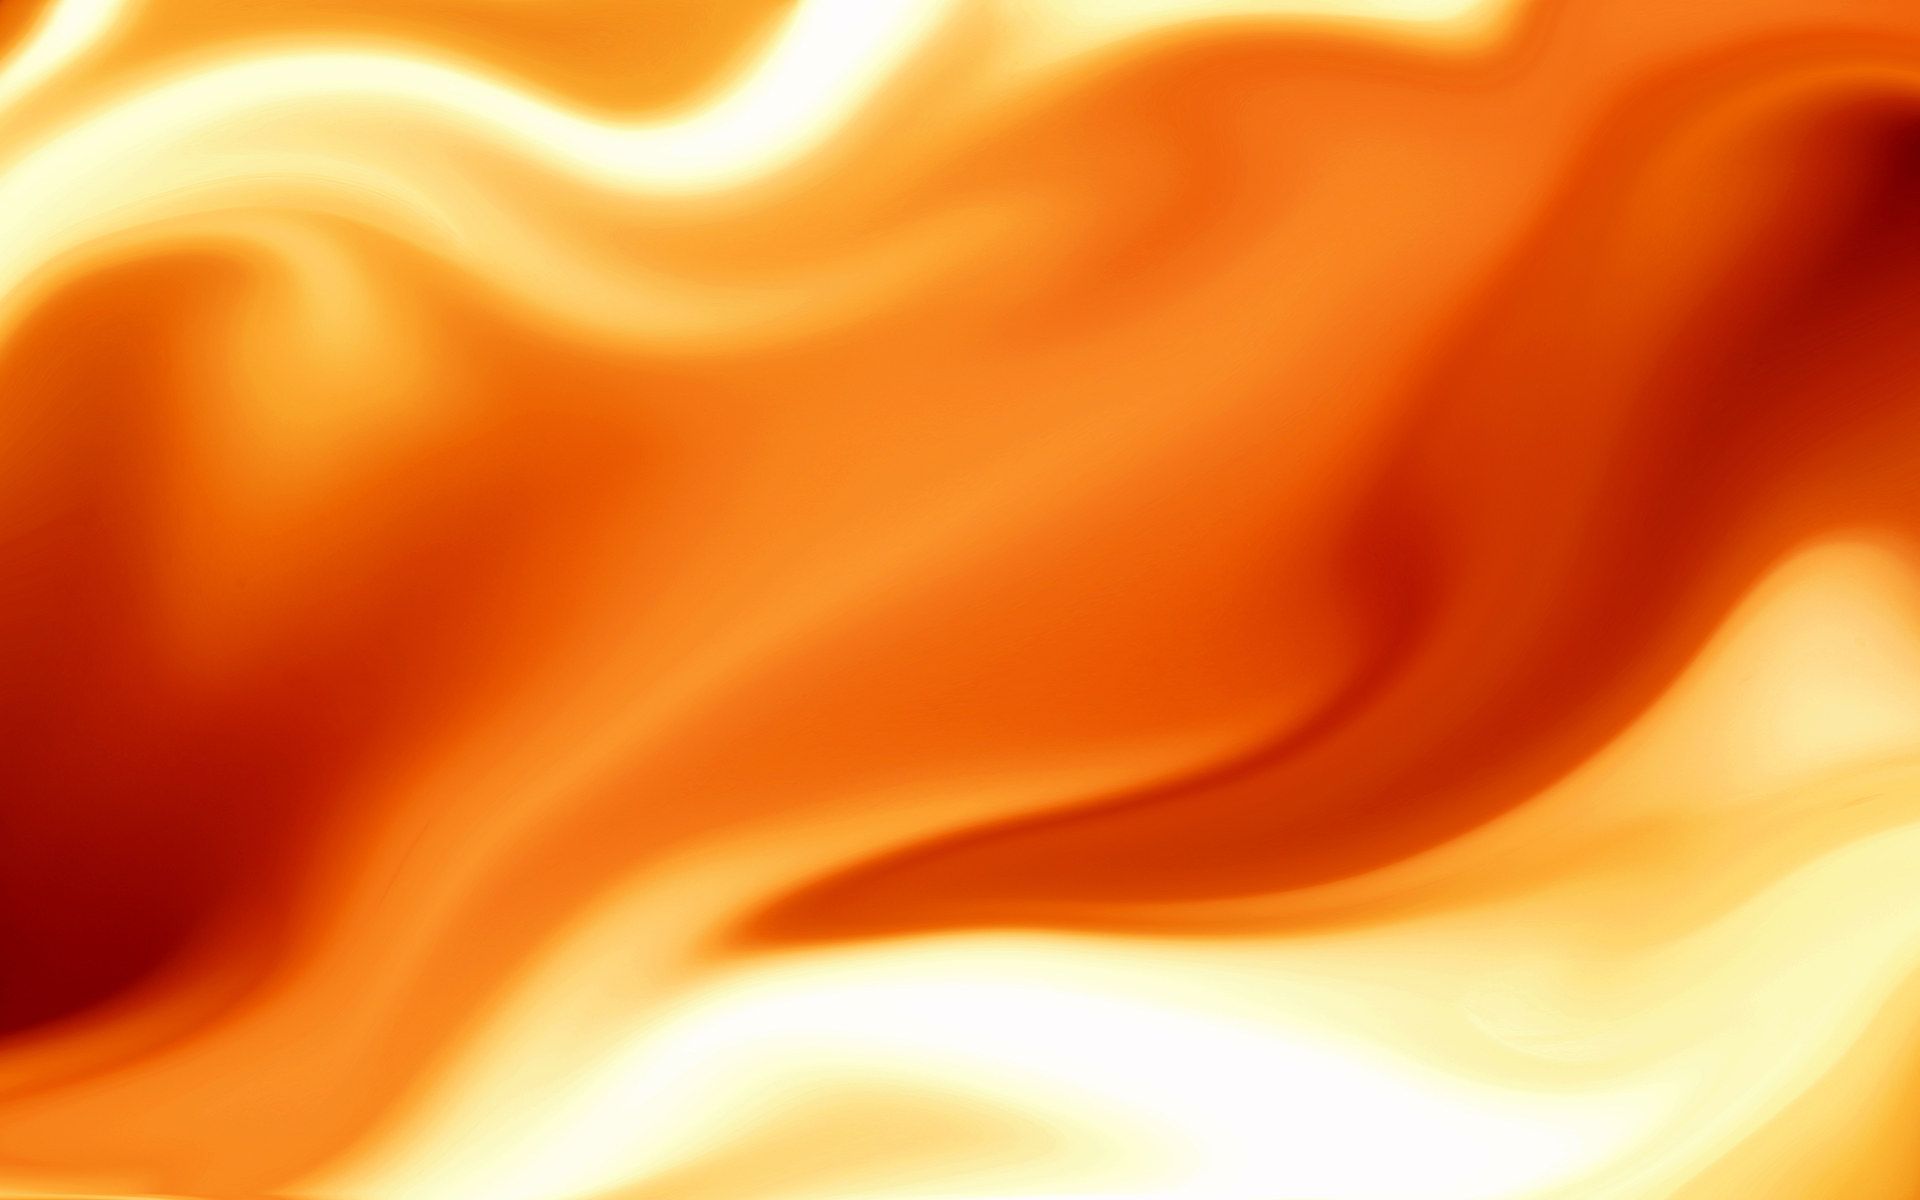 Orange Background 2orange Colour Abstract Bcolors Gallery